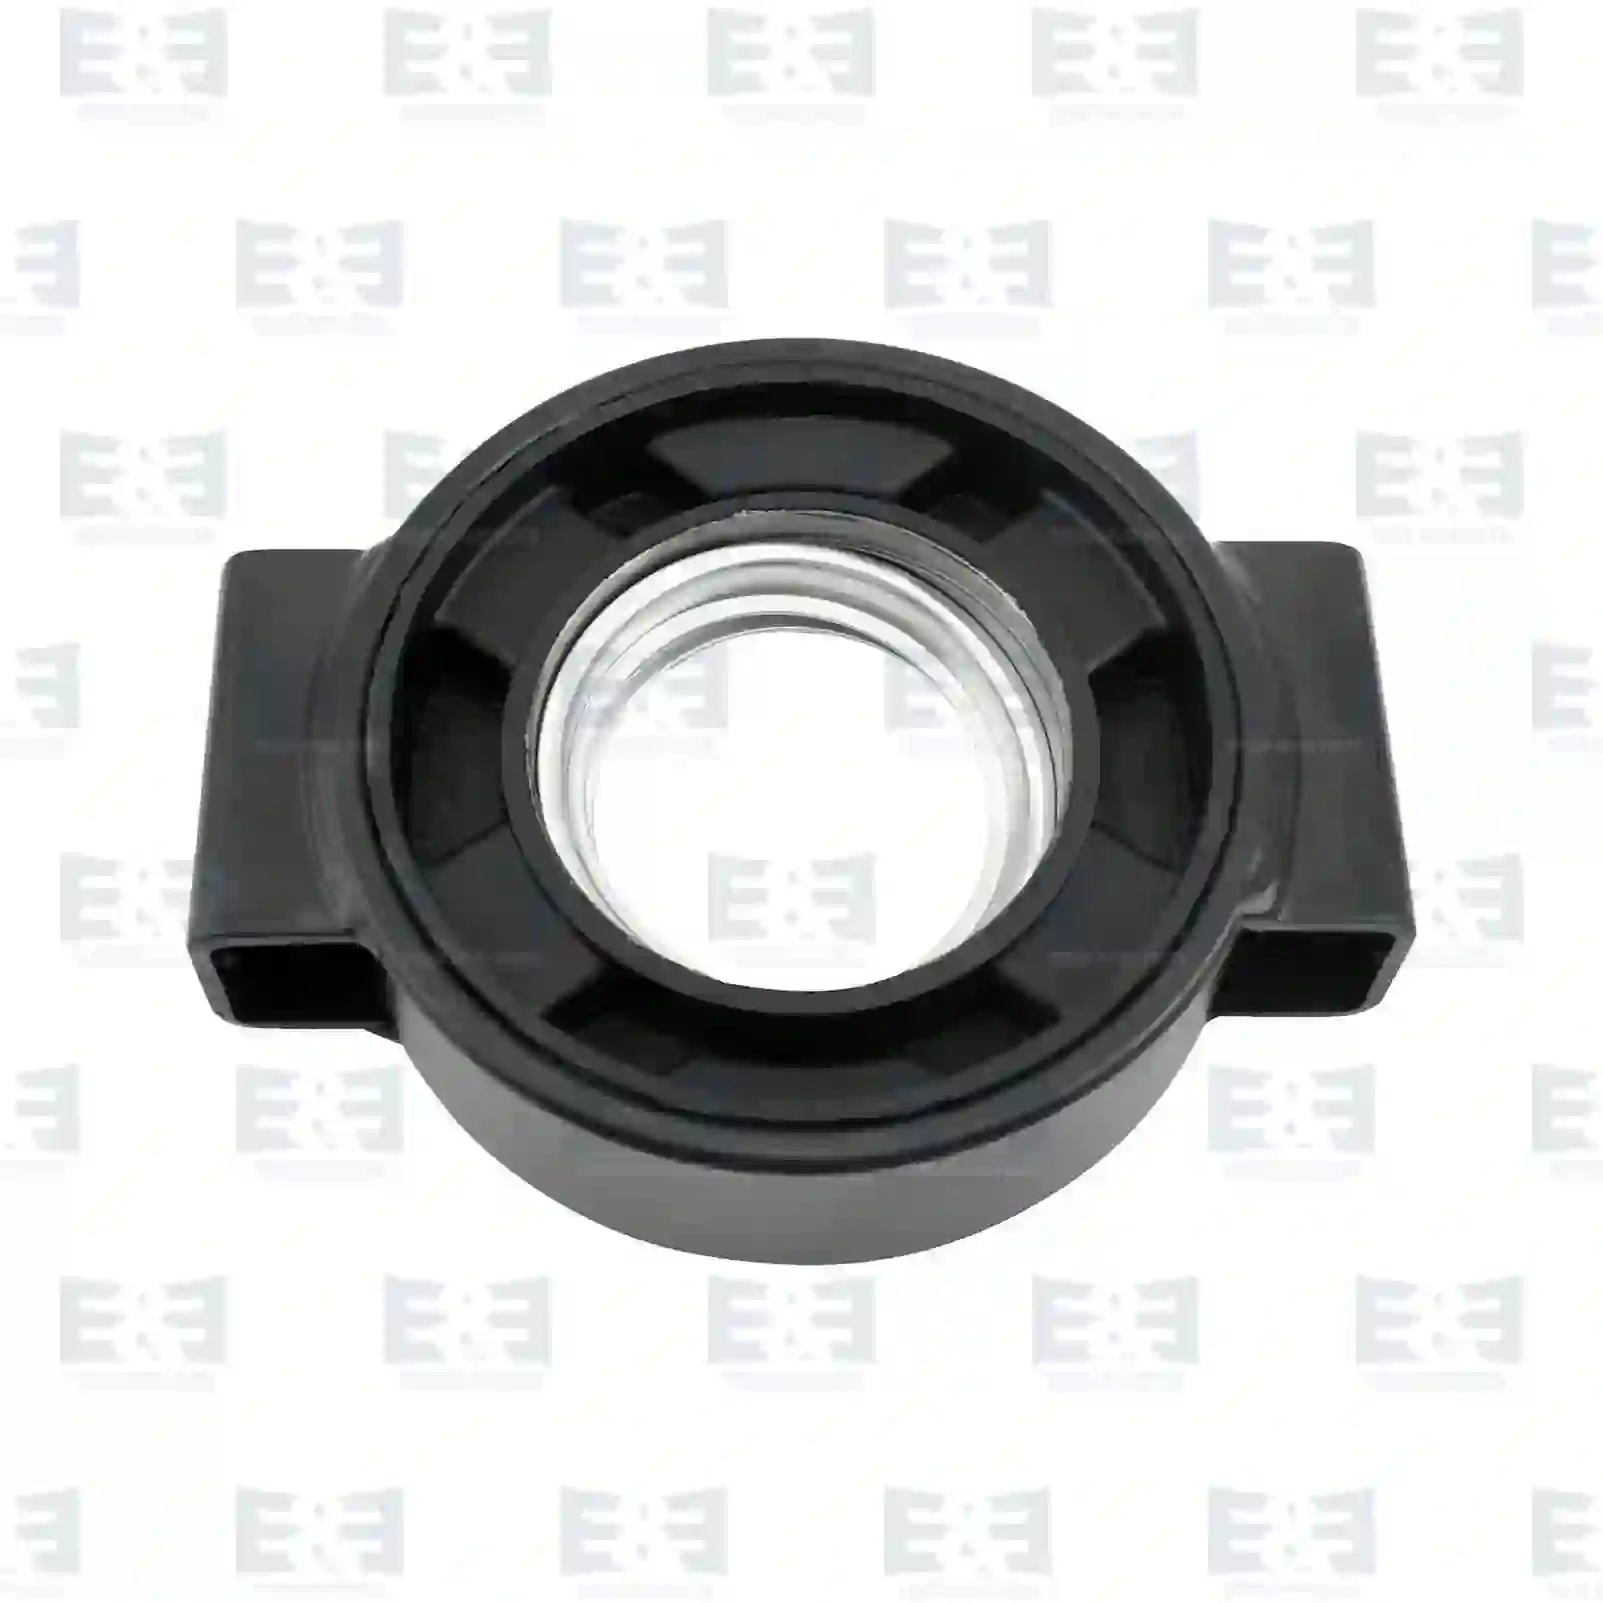 Center bearing, without ball bearing, 2E2276962, 3954100022, 6204100010, 6554100122 ||  2E2276962 E&E Truck Spare Parts | Truck Spare Parts, Auotomotive Spare Parts Center bearing, without ball bearing, 2E2276962, 3954100022, 6204100010, 6554100122 ||  2E2276962 E&E Truck Spare Parts | Truck Spare Parts, Auotomotive Spare Parts